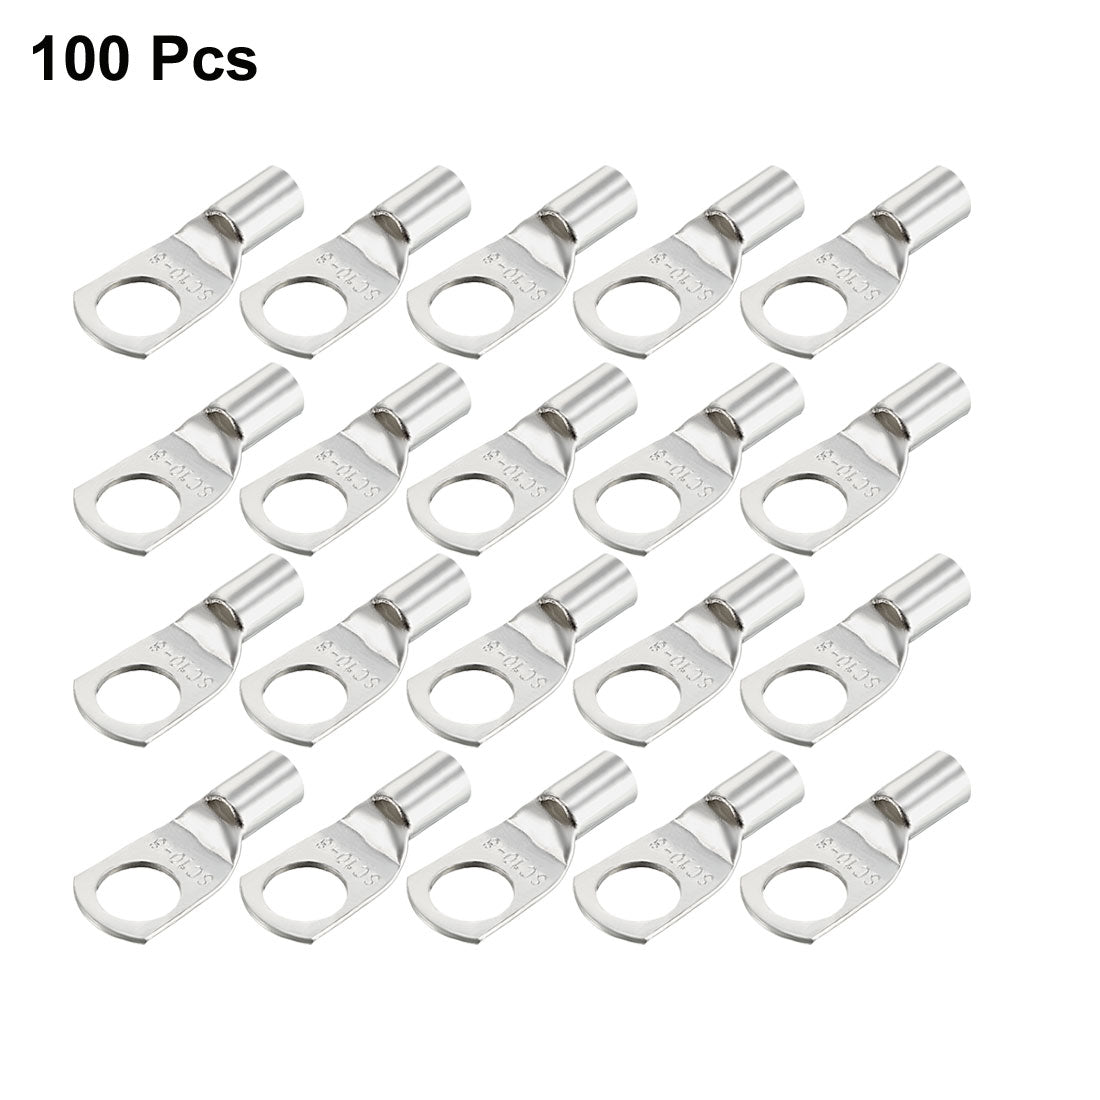 uxcell Uxcell 100Pcs SC 10-8 Non-Insulated U-Type Copper Crimp Terminals 10mm2 Wire Connector Silver Tone